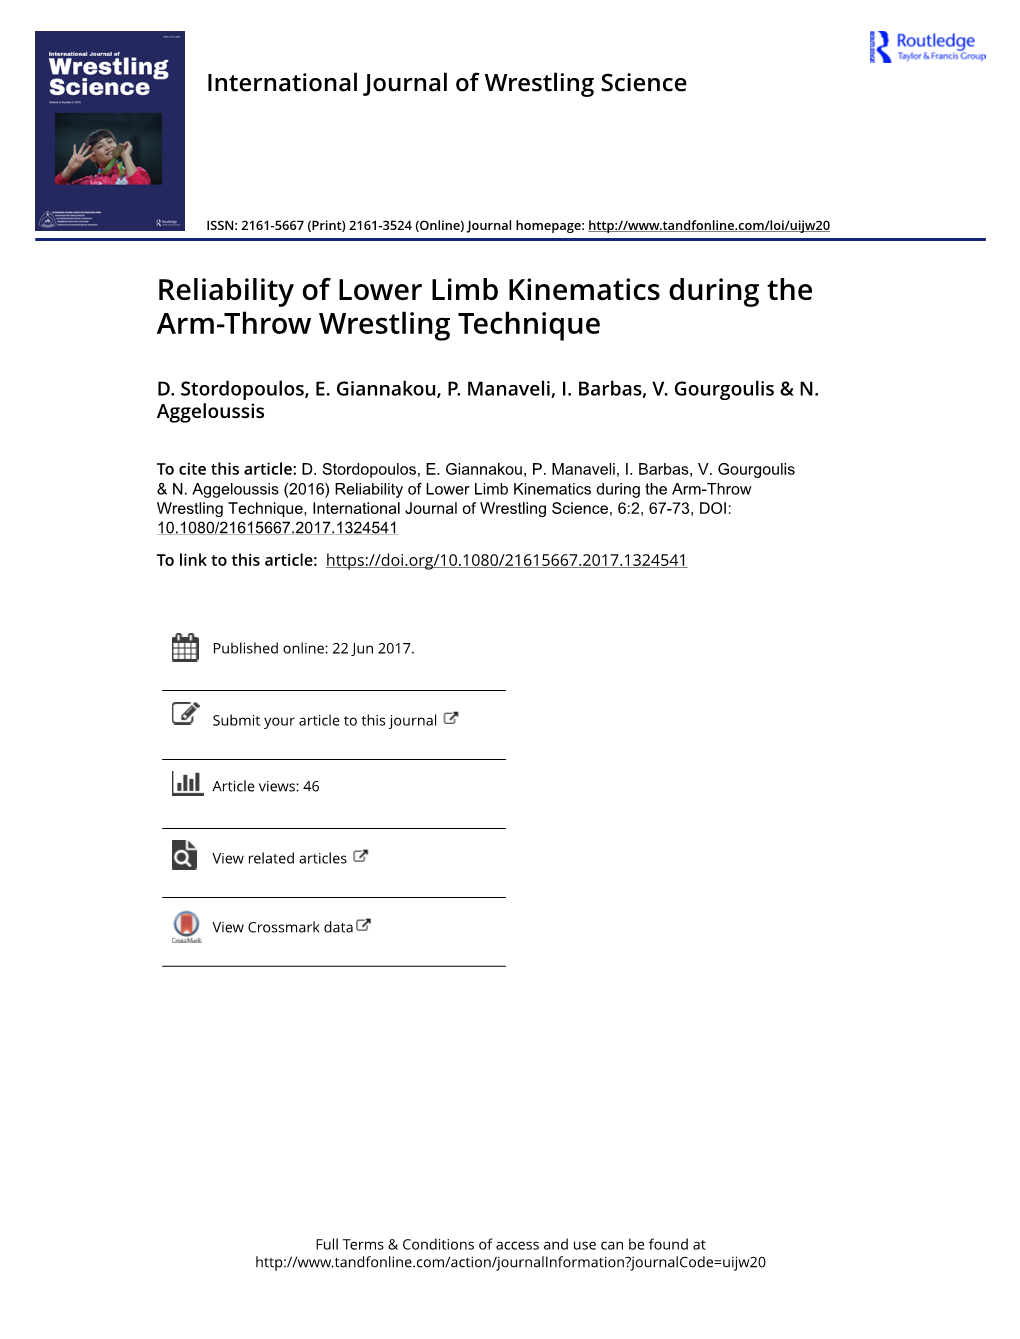 Reliability of Lower Limb Kinematics During the Arm-Throw Wrestling Technique